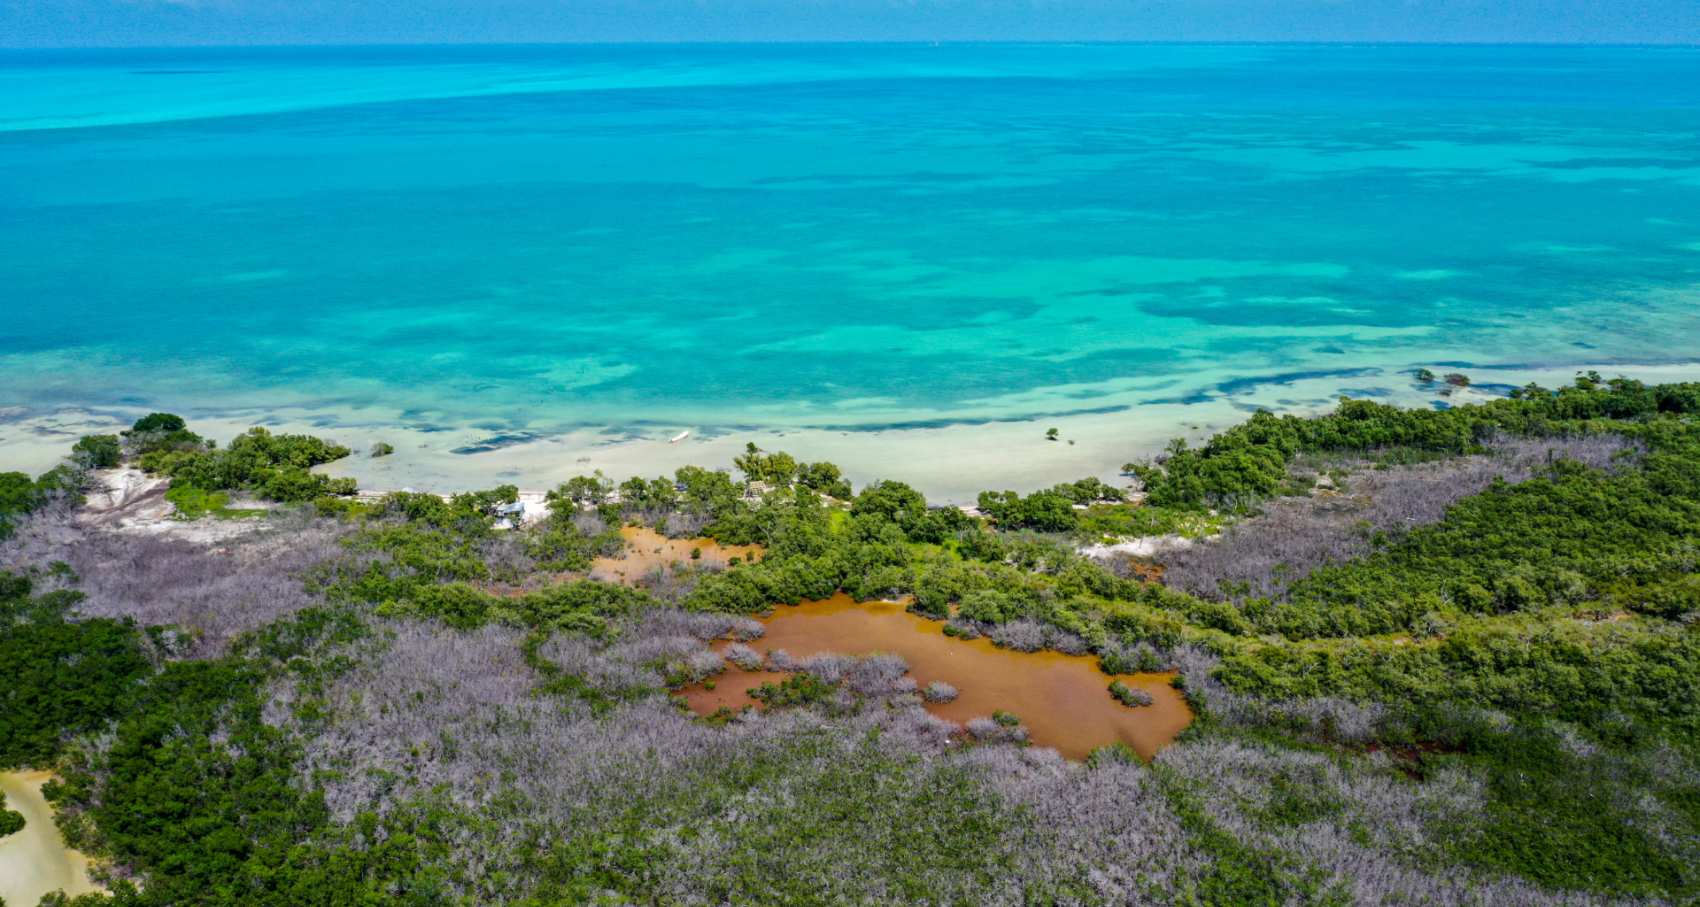 turquoise waters of the Caribbean sea meets dry coastline